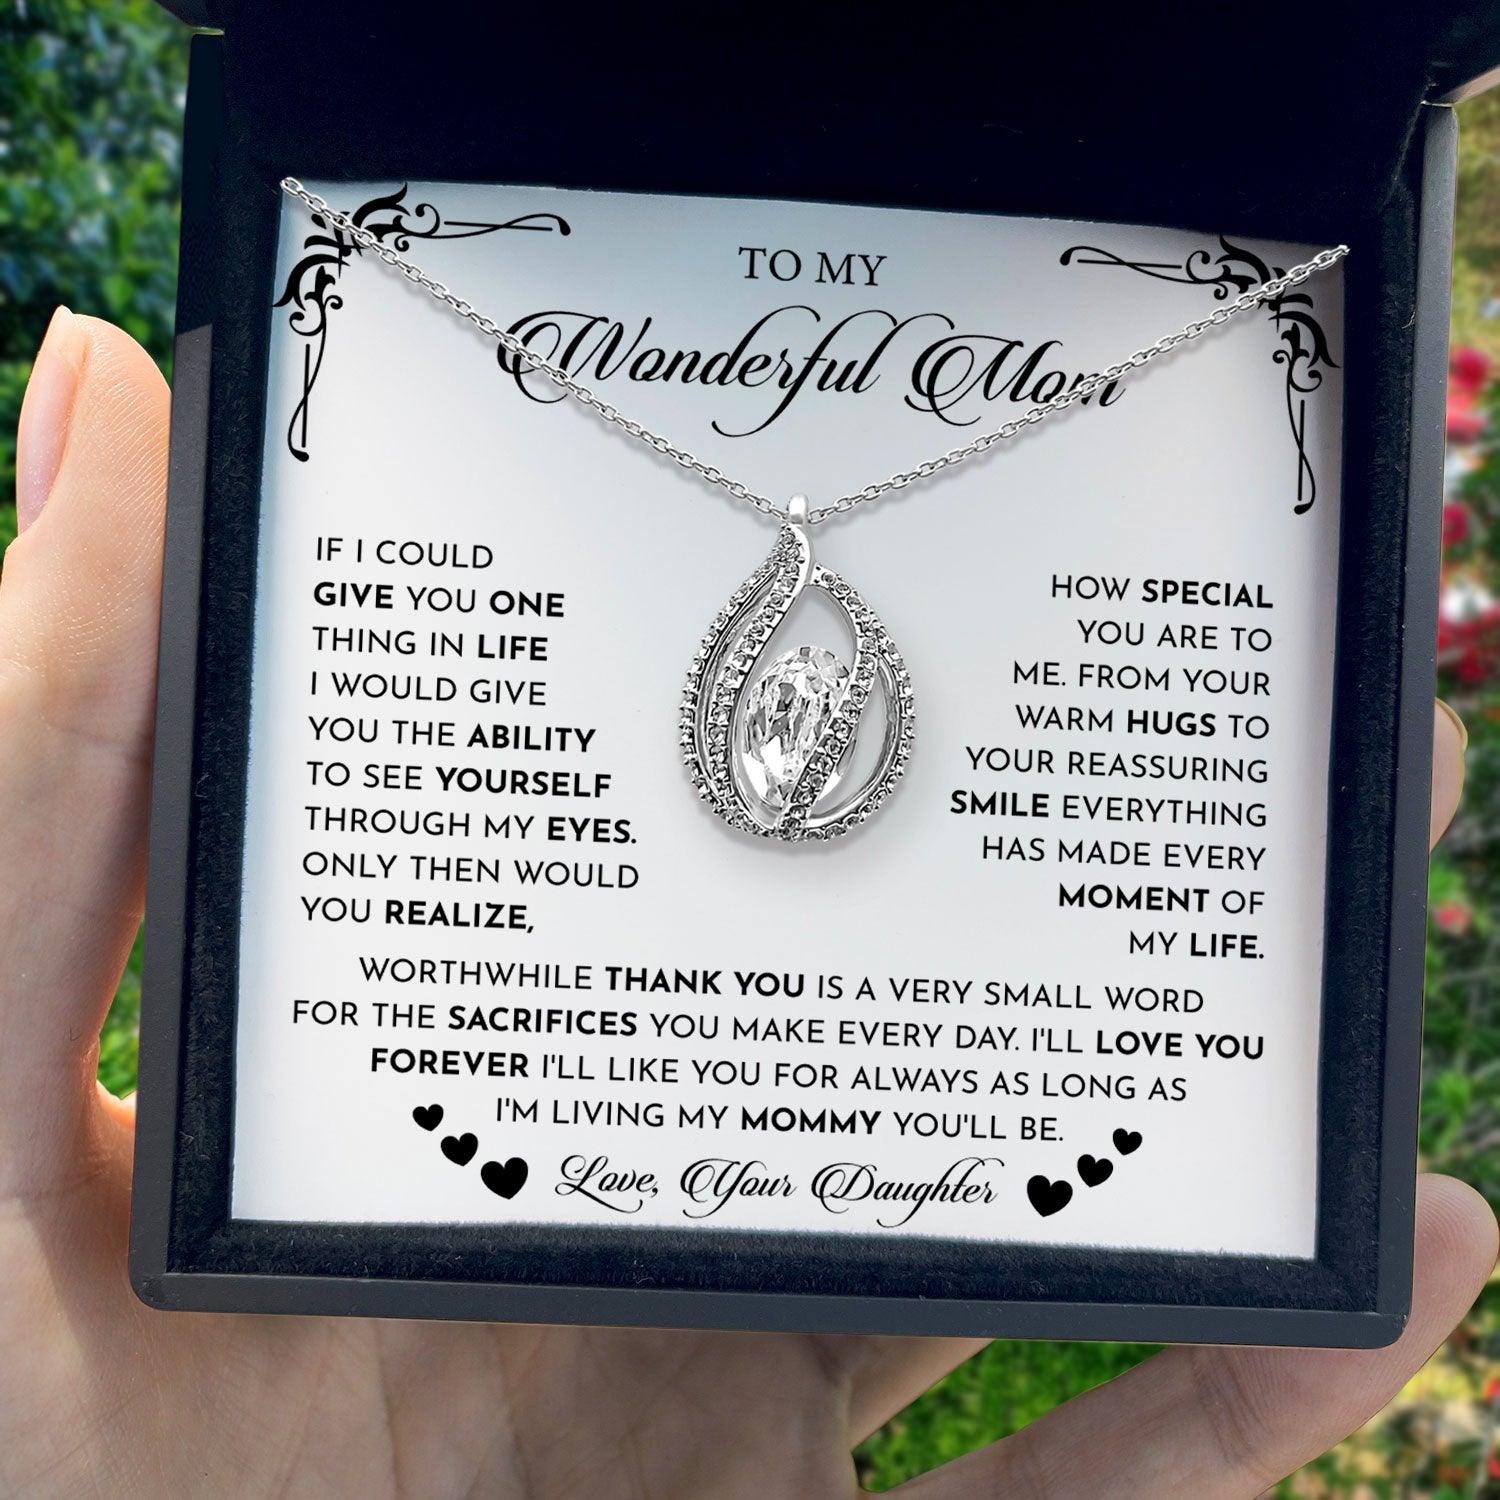 To My Wonderful Mom - Worthwhile Thank You Is a Very Small Word For The Sacrifices You Make Everyday - Orbital Birdcage Necklace - TRYNDI